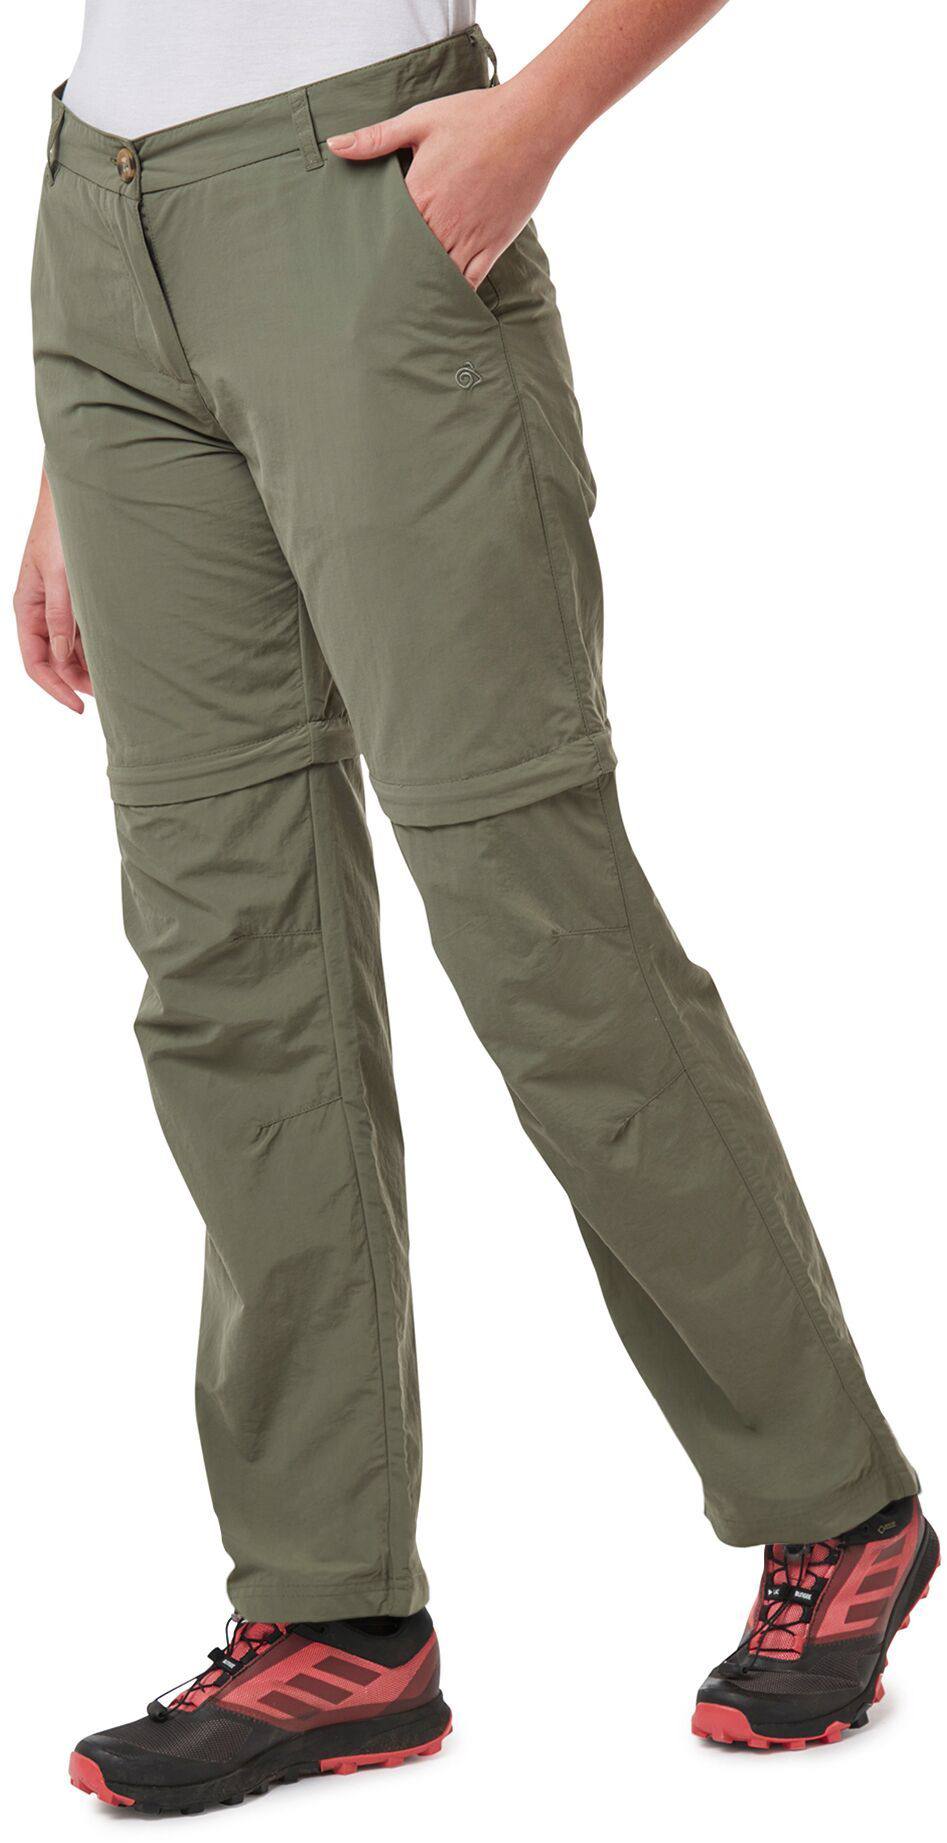 Craghoppers Women’s Nosilife Convertible Trousers